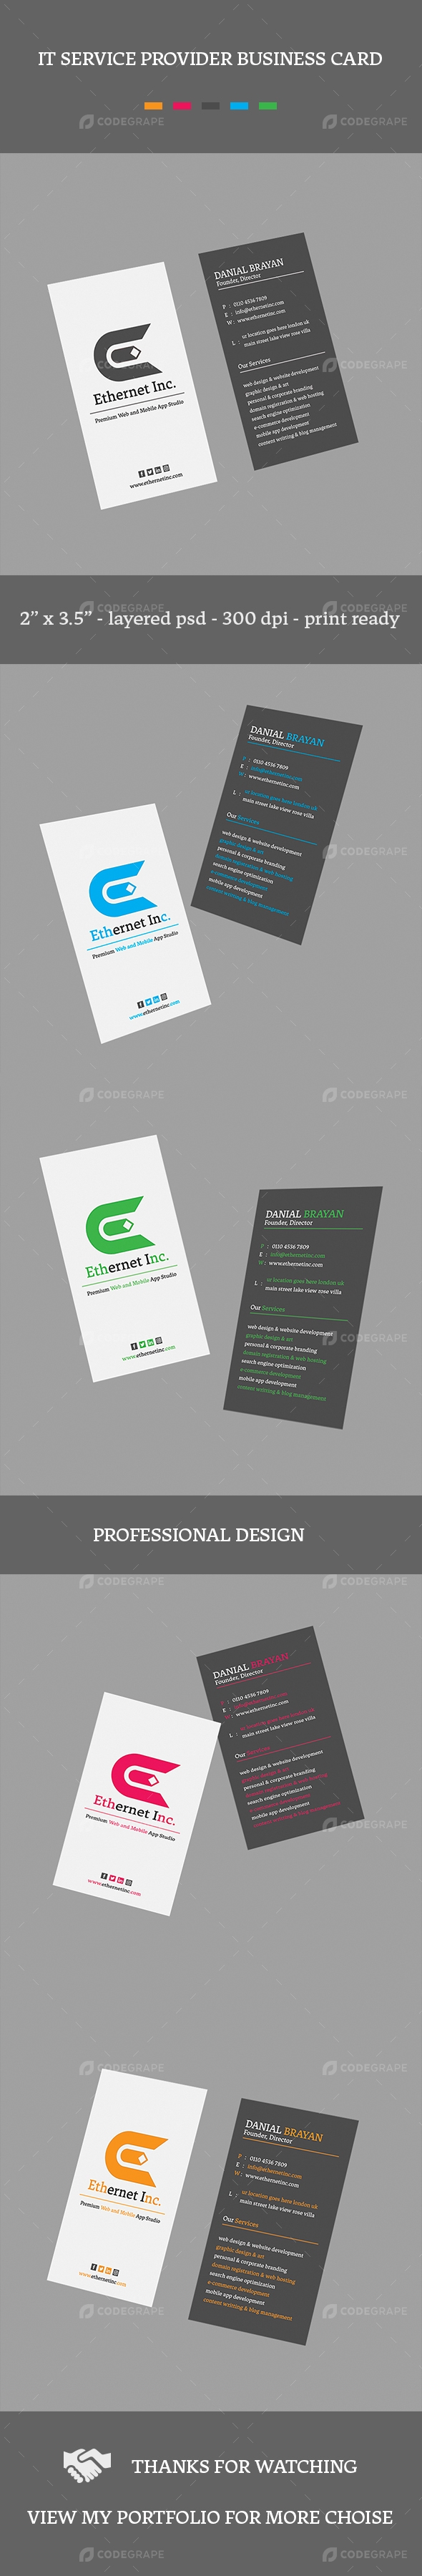 IT Service Provider Business Card